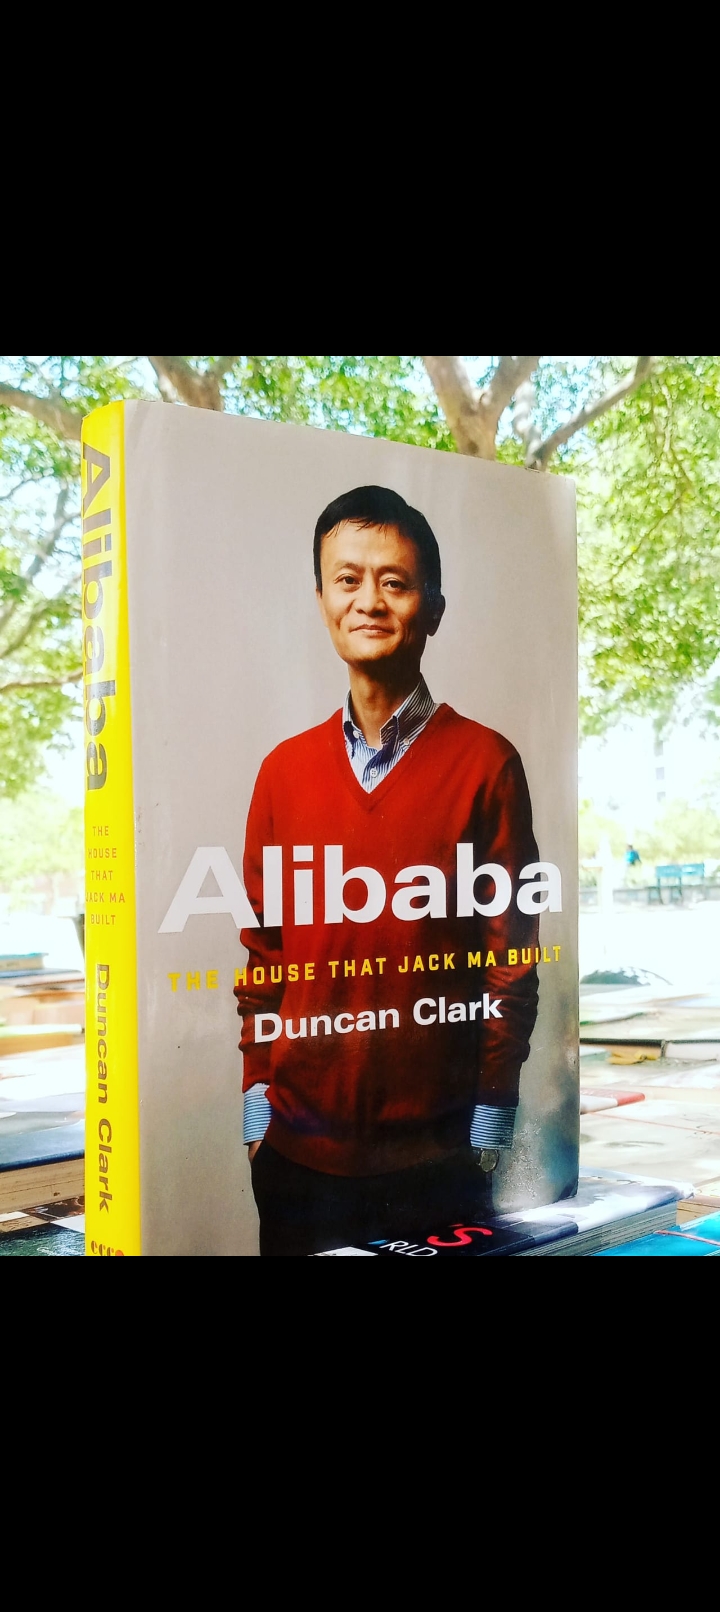 alibaba the house that jack ma built by duncan clark. original hardcover